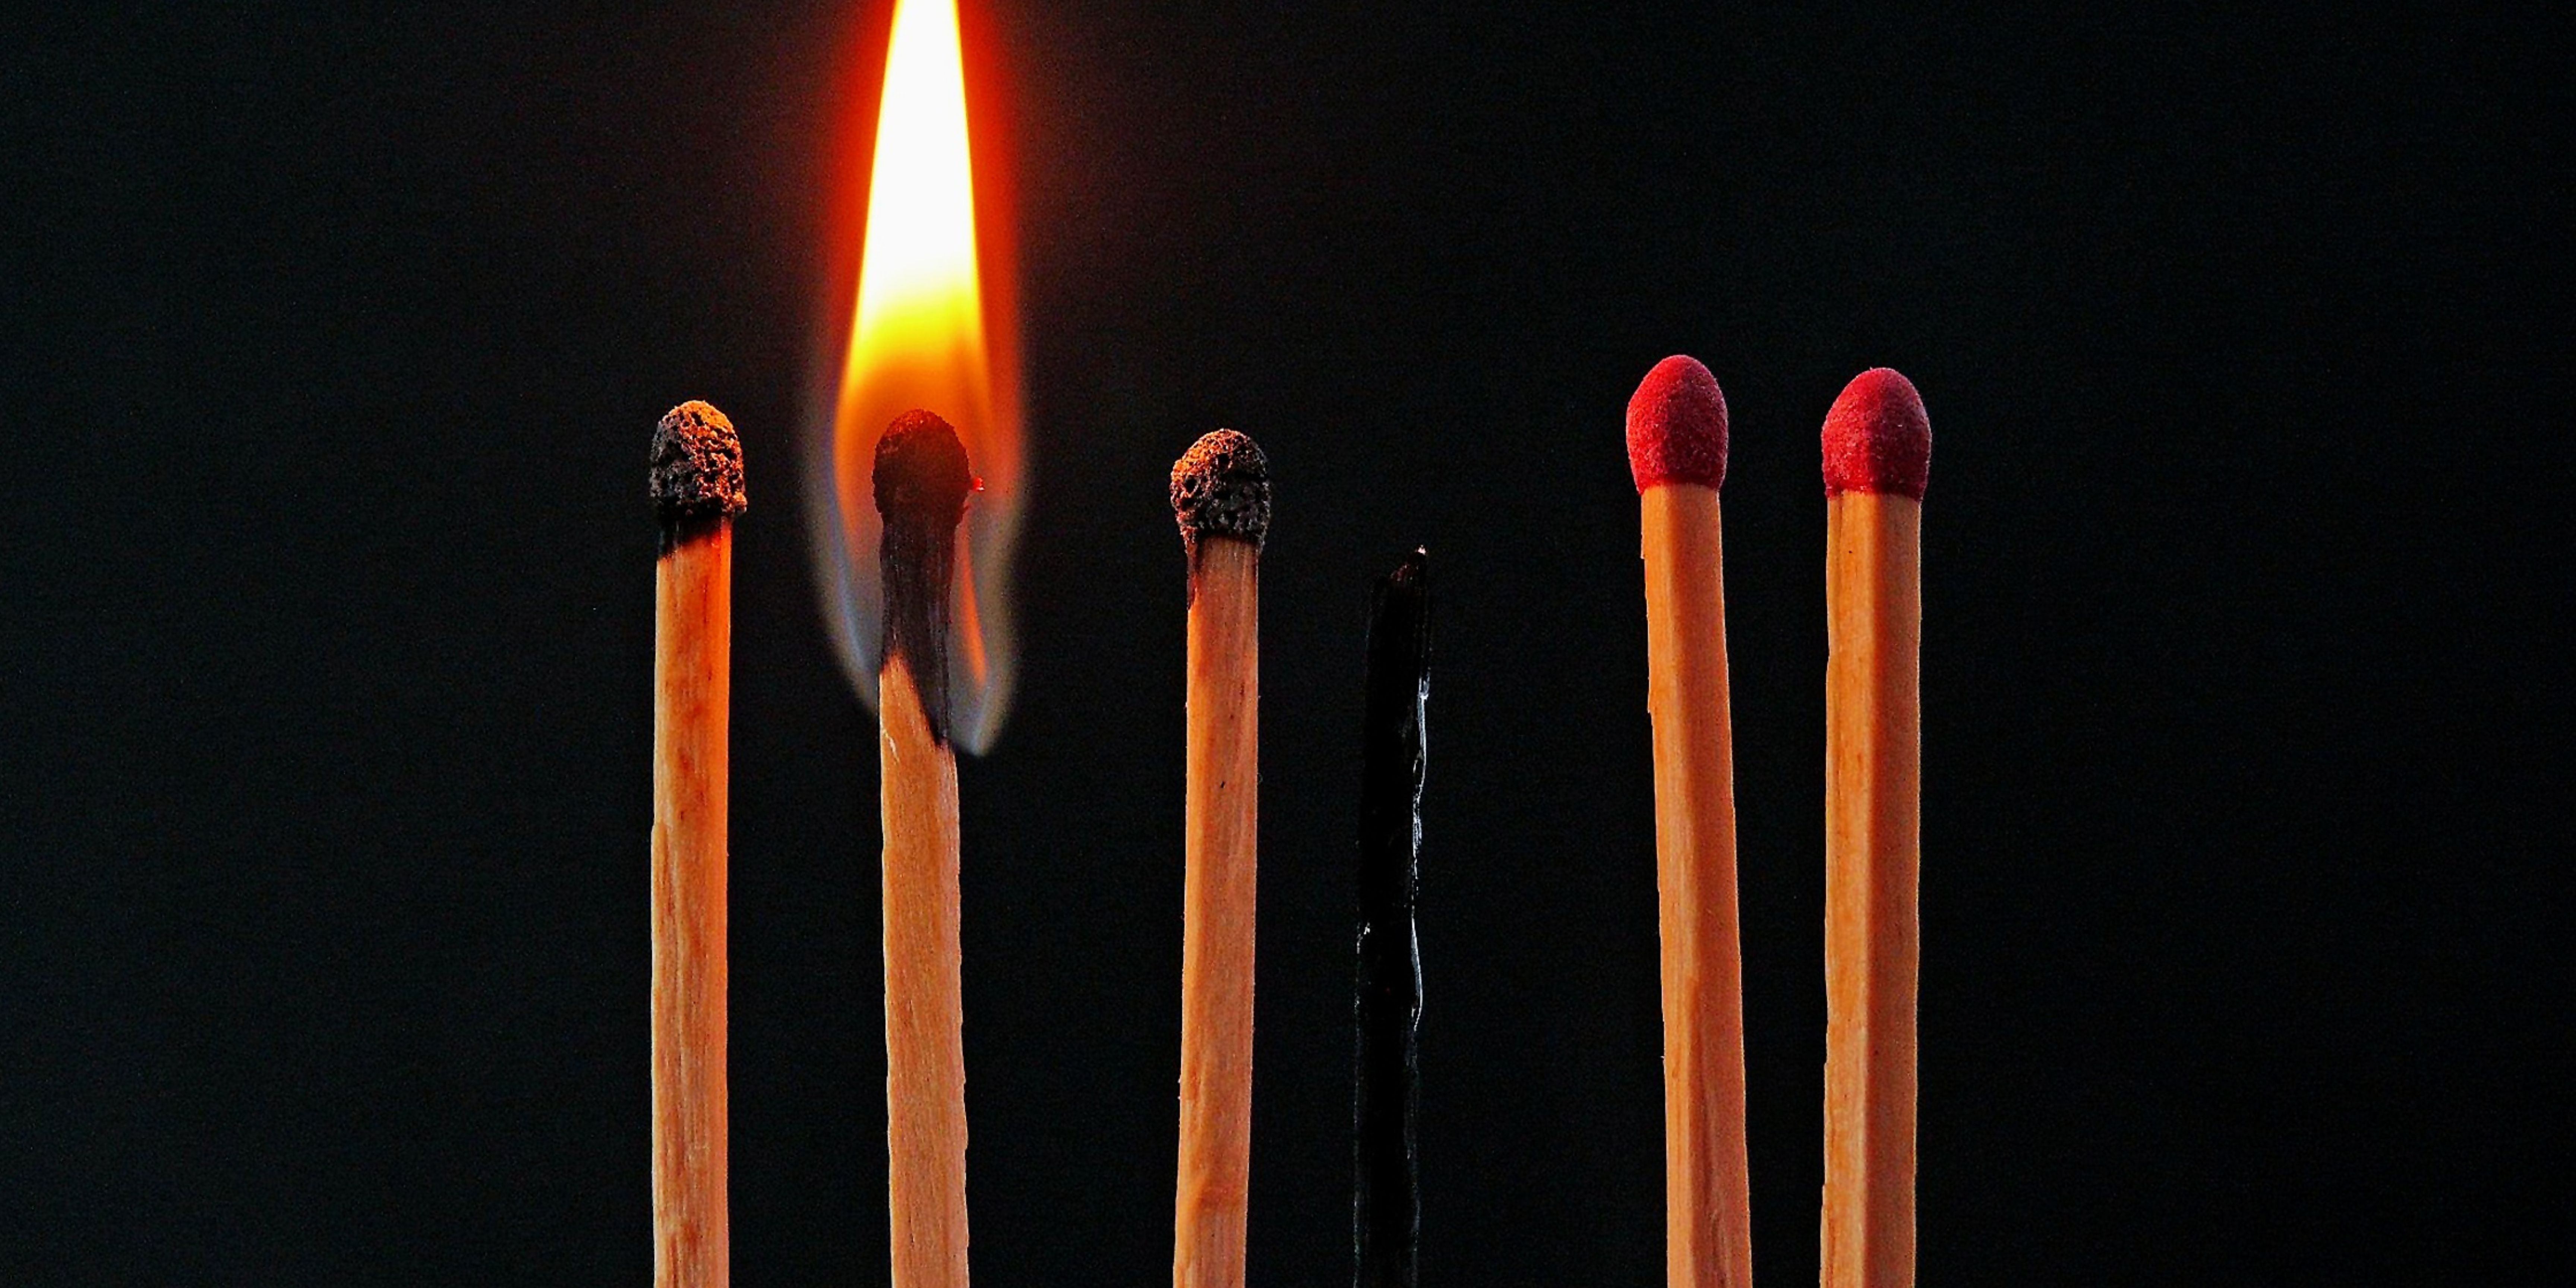 Recognizing the Signs of Reader Burnout (An In-depth look)